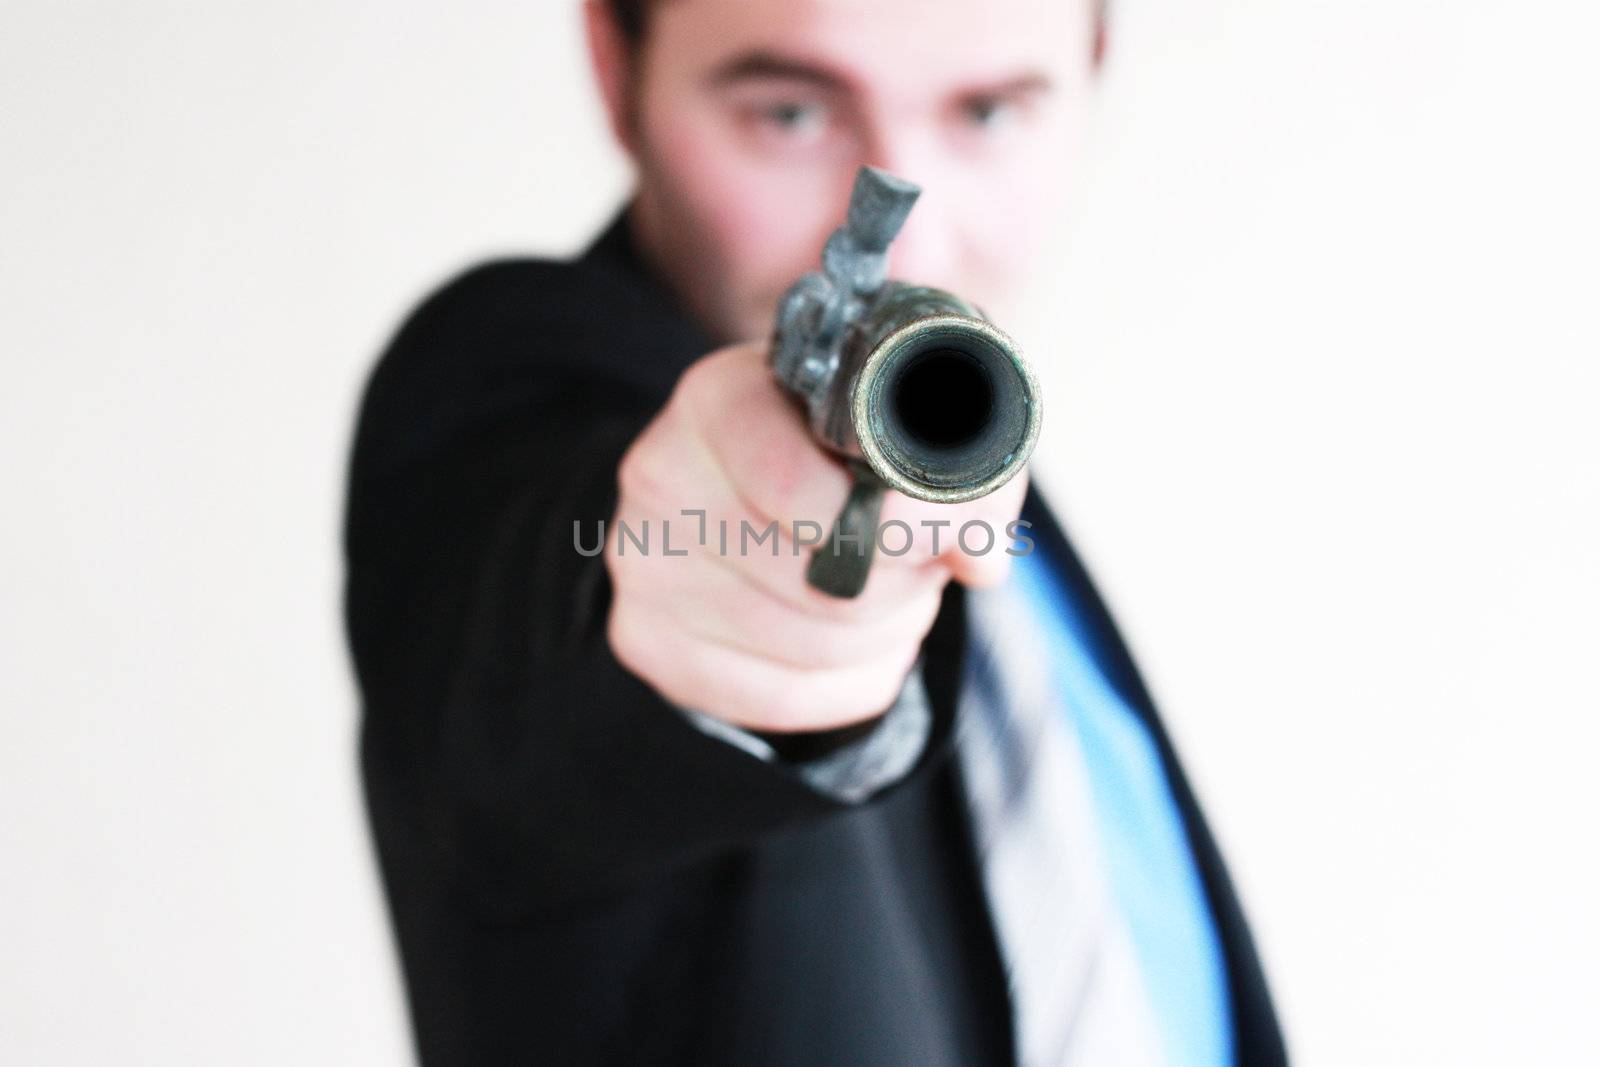 Businessman takes to gun to protect his business